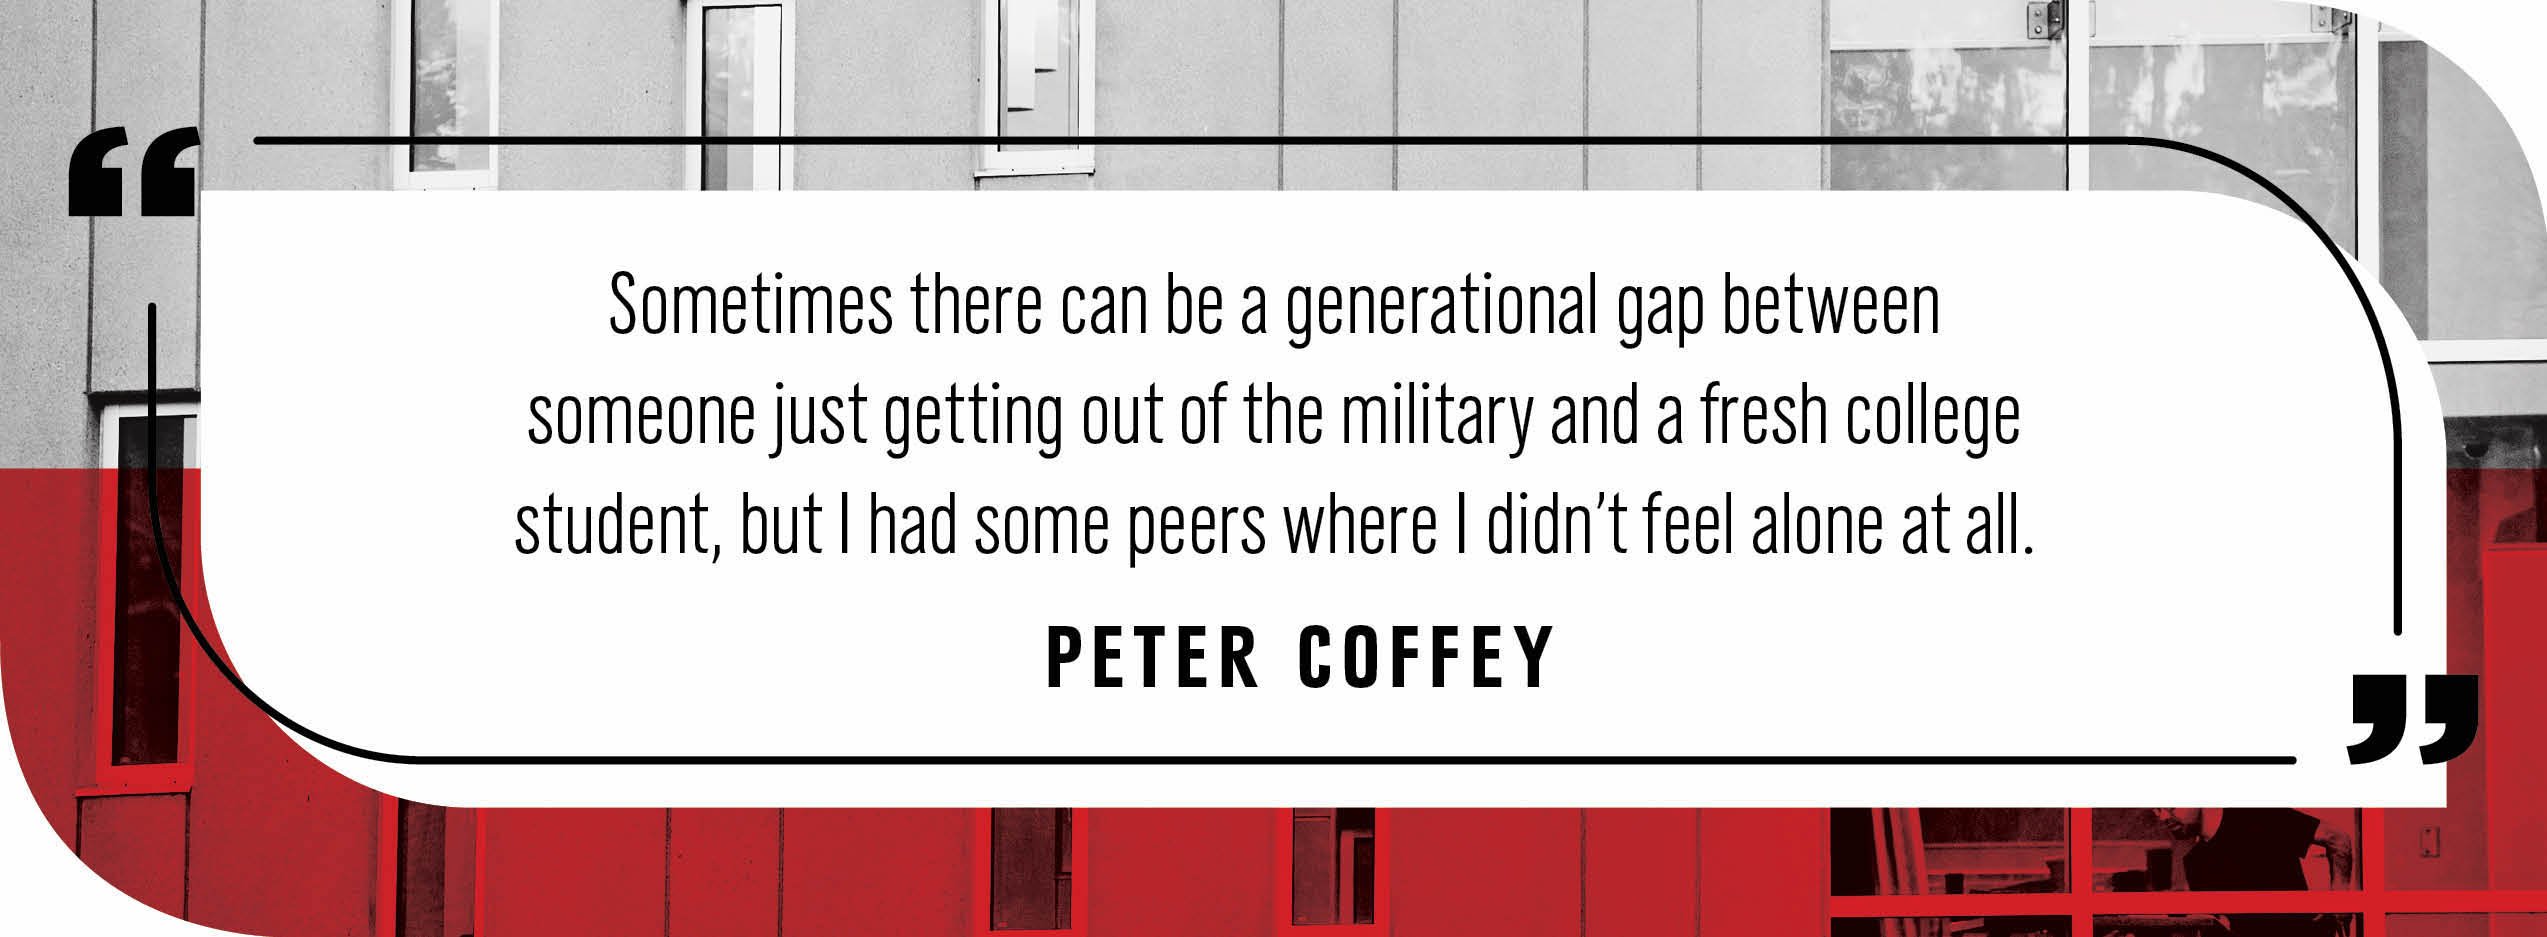 Quote by Peter Coffey: "Sometimes there can be a generational gap between someone just getting out of the military and a fresh college student, but I had some peers where I didn’t feel alone at all."